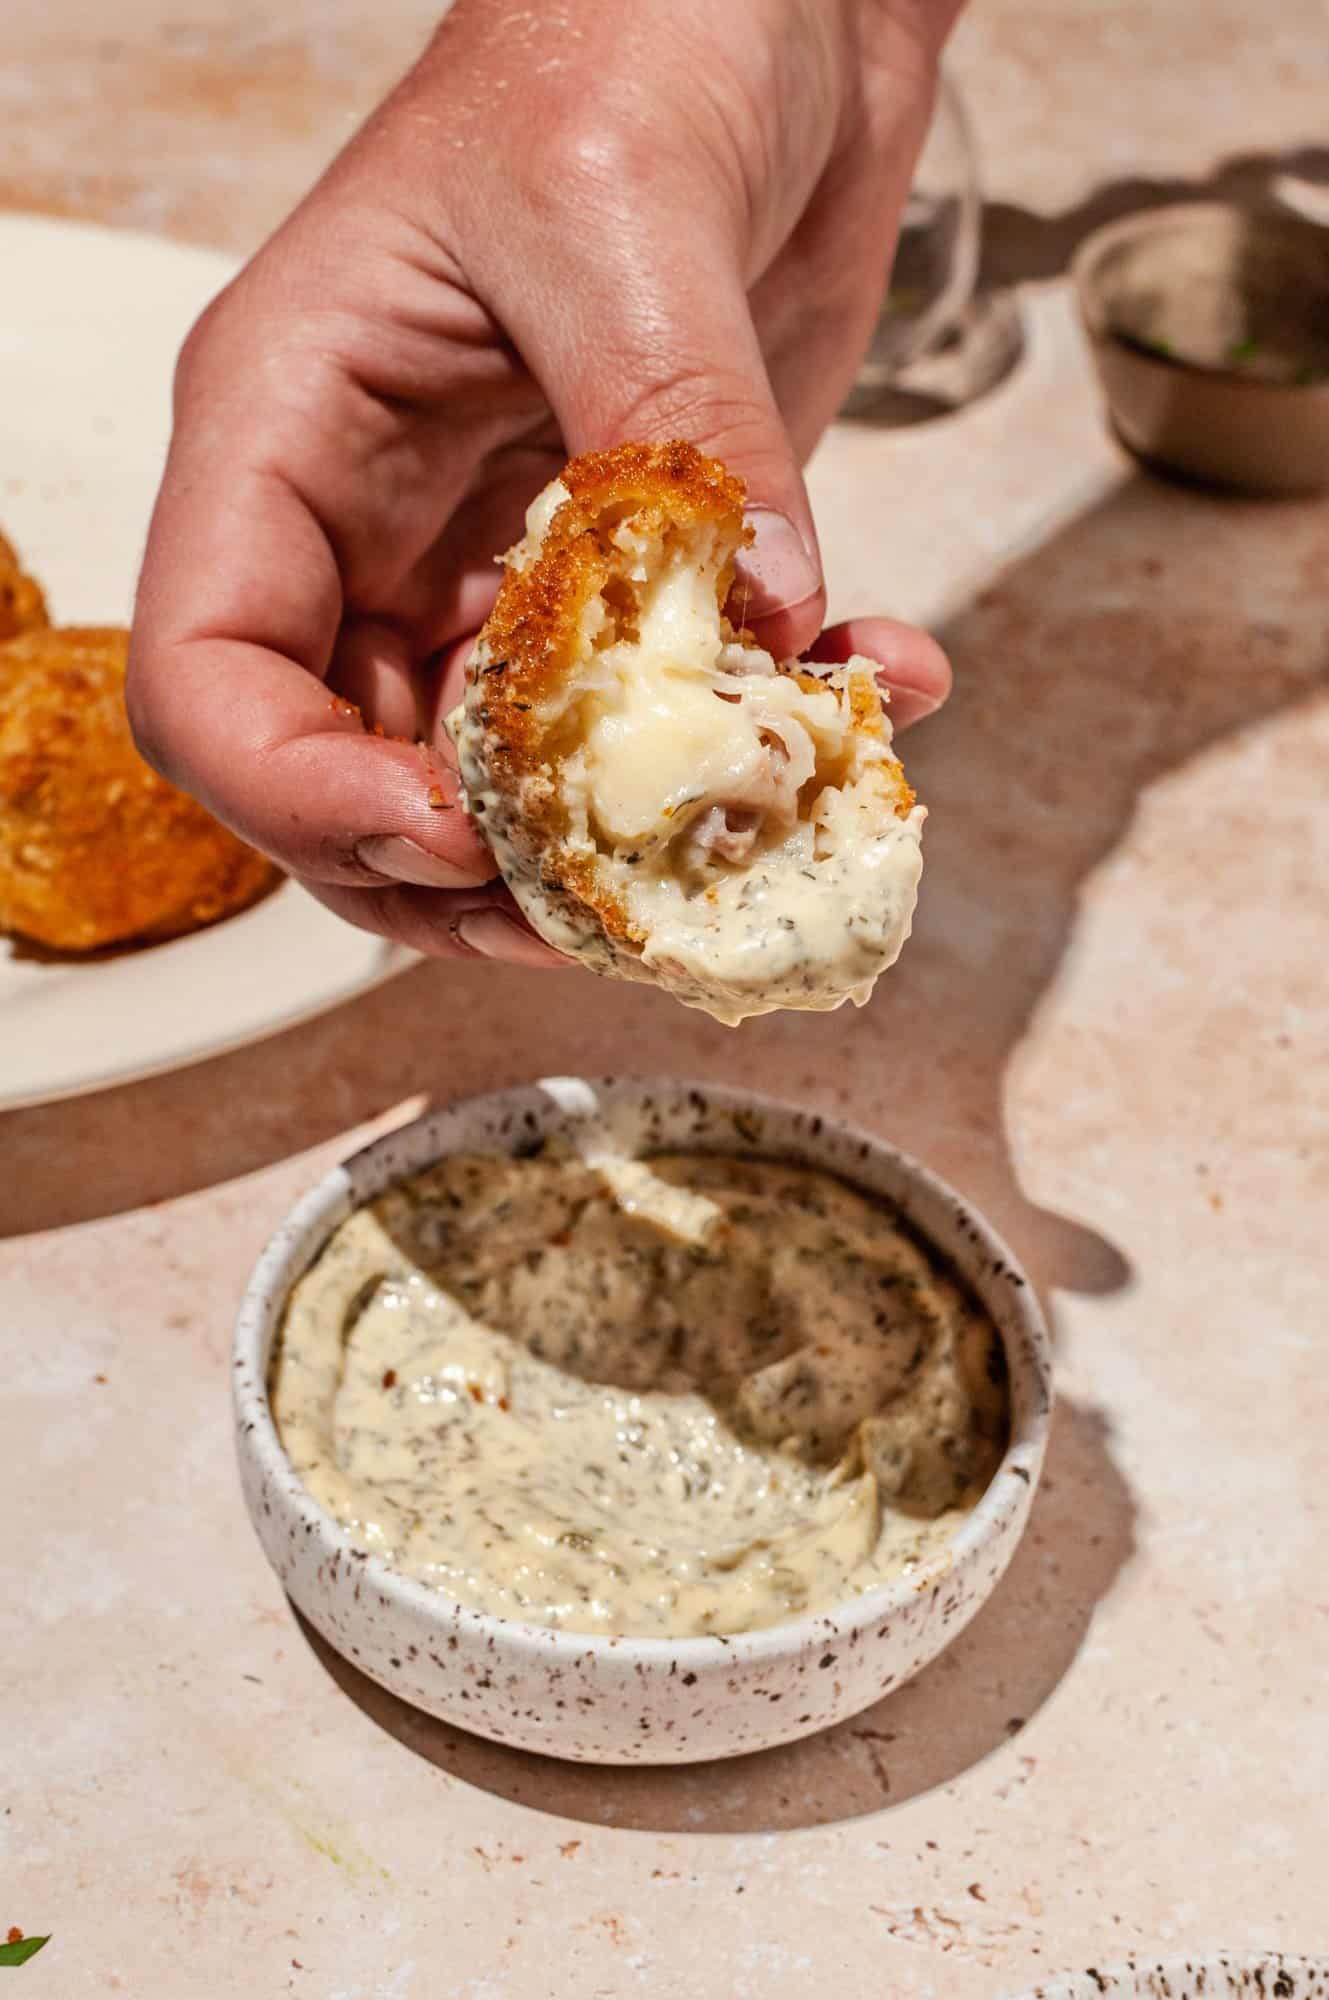 dipping half ham croquette into aioli, showing melted cheese on inside